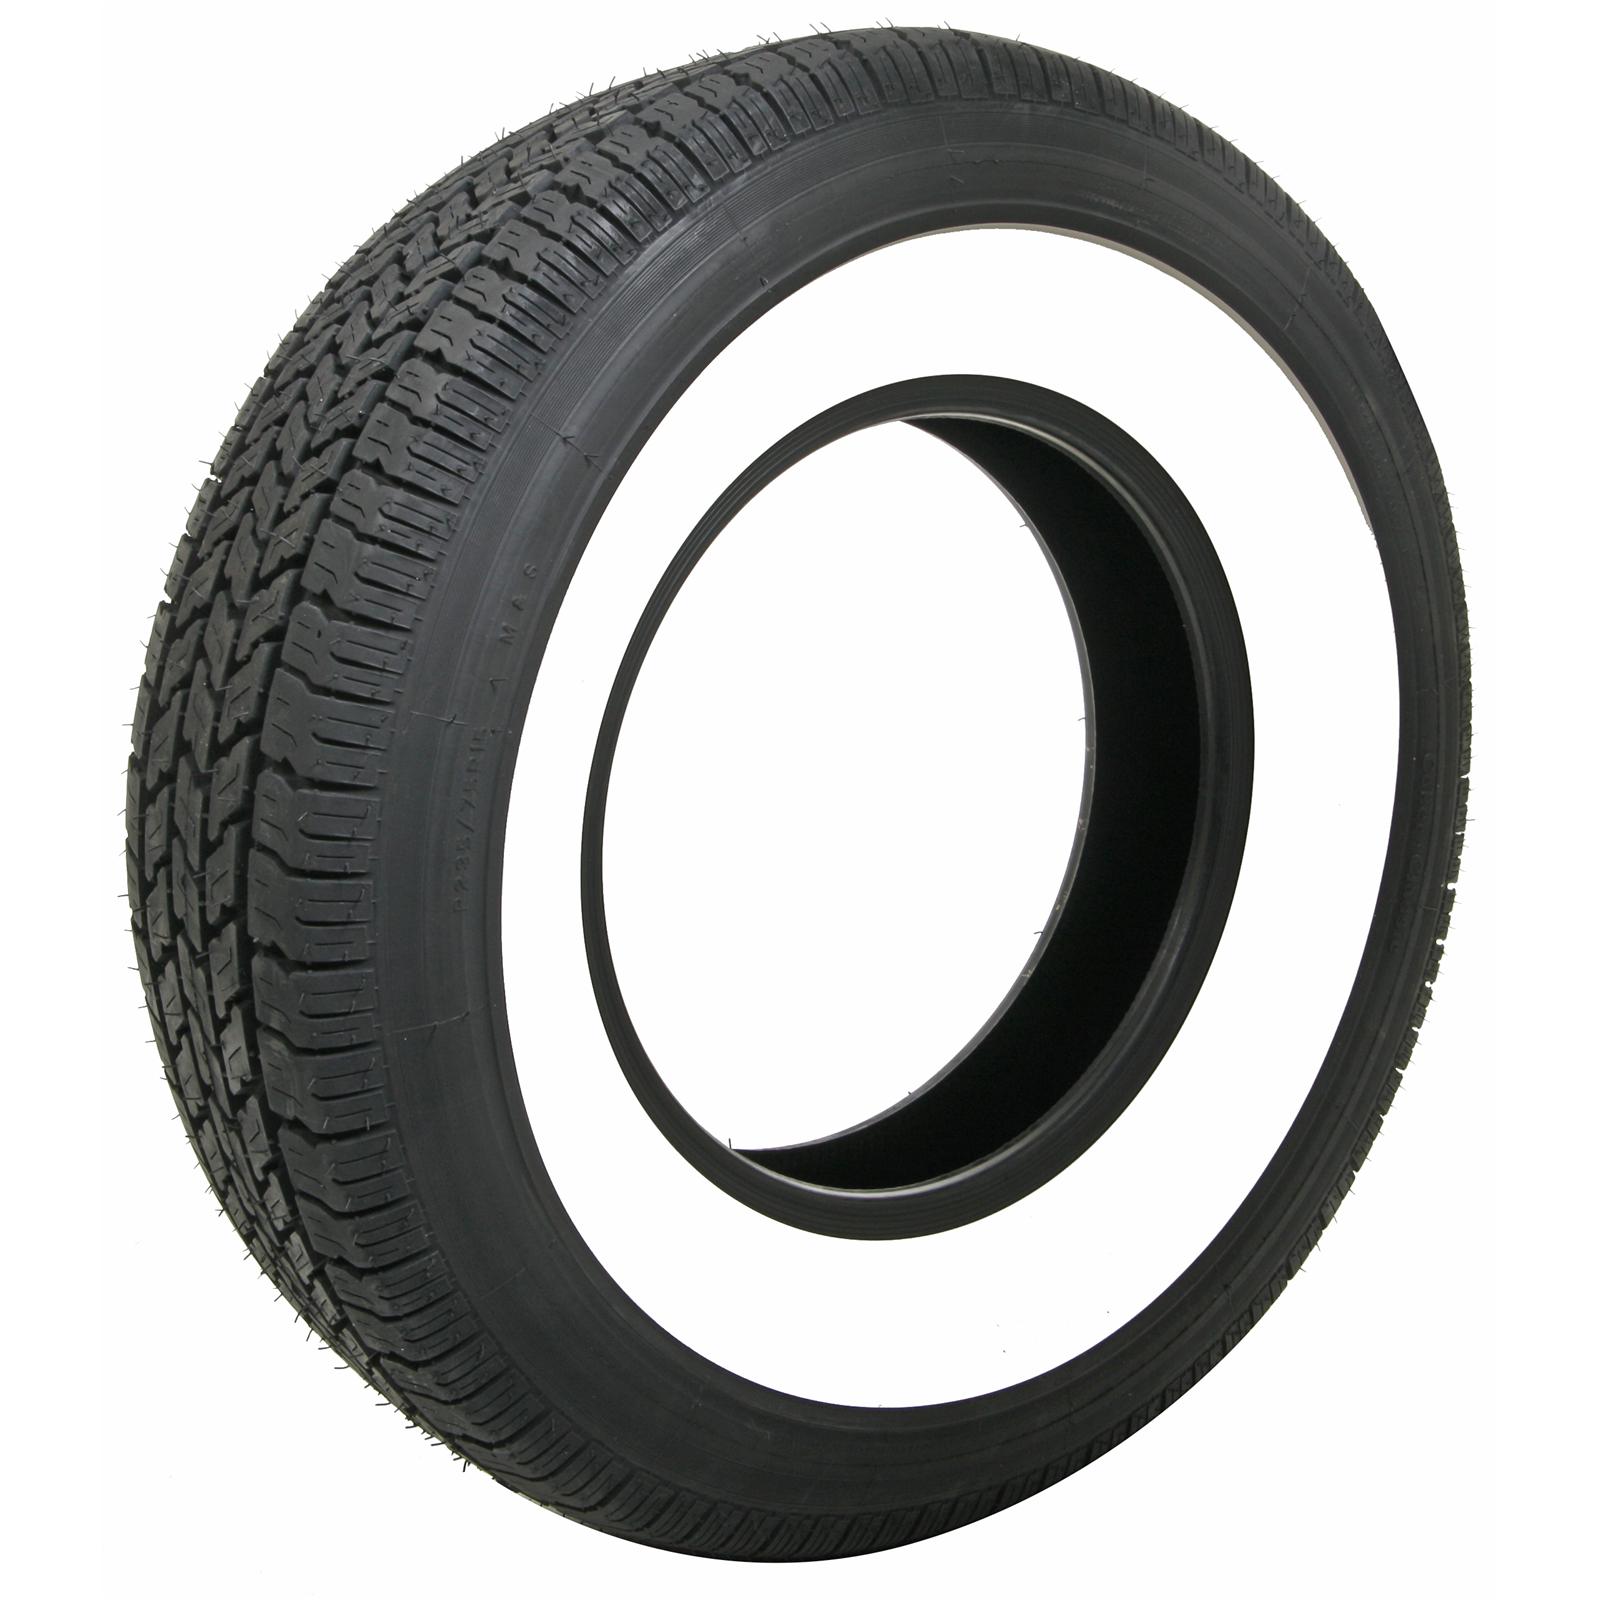 Classic Whitewall Tire New For Sale By Palm Beach Classics.